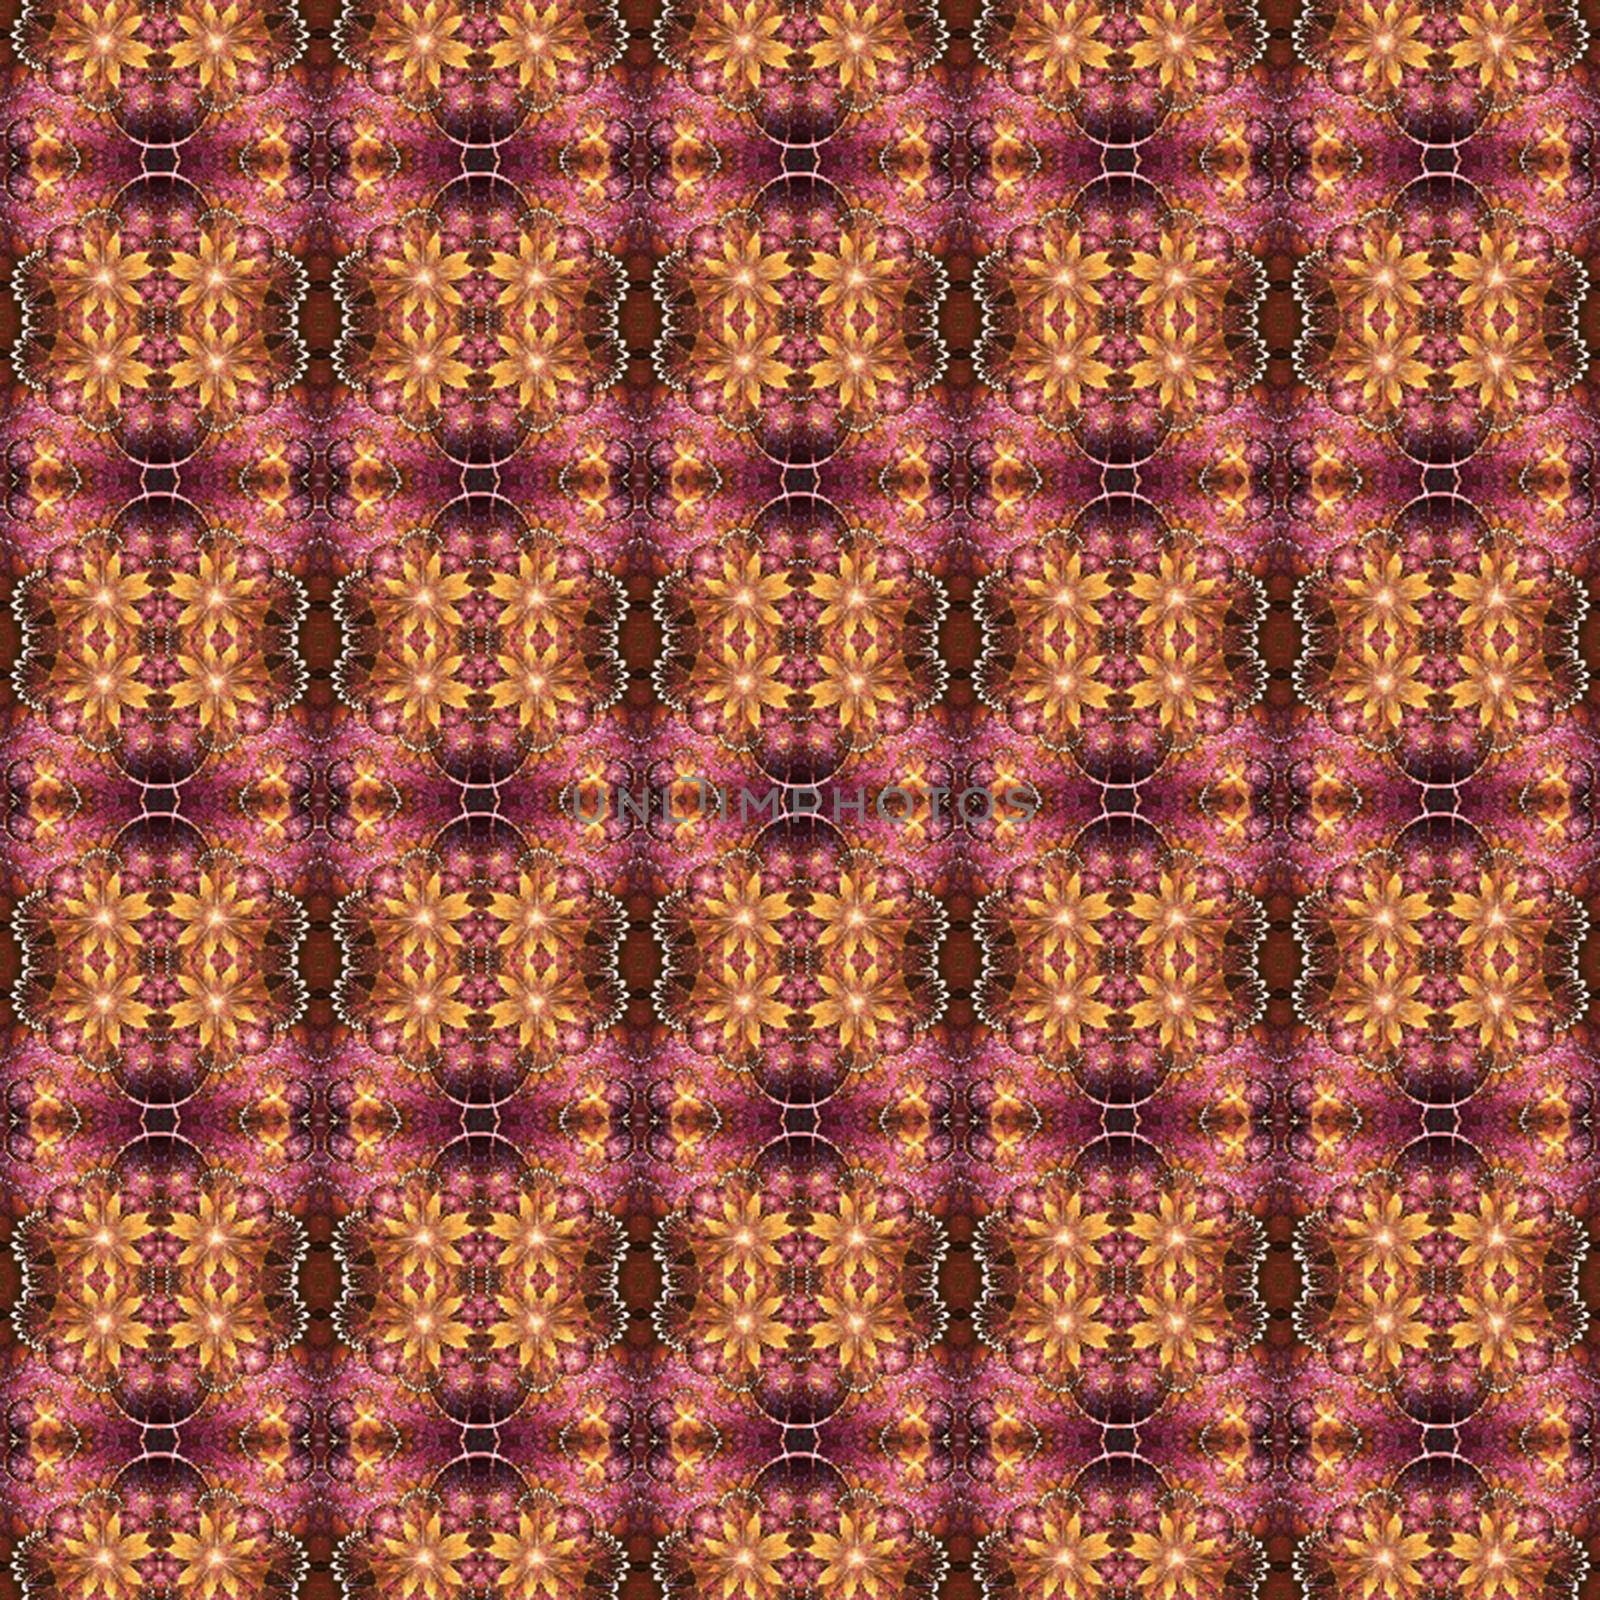 A pattern is a regularity in the world, in human-made design, or in abstract ideas. As such, the elements of a pattern repeat in a predictable manner.